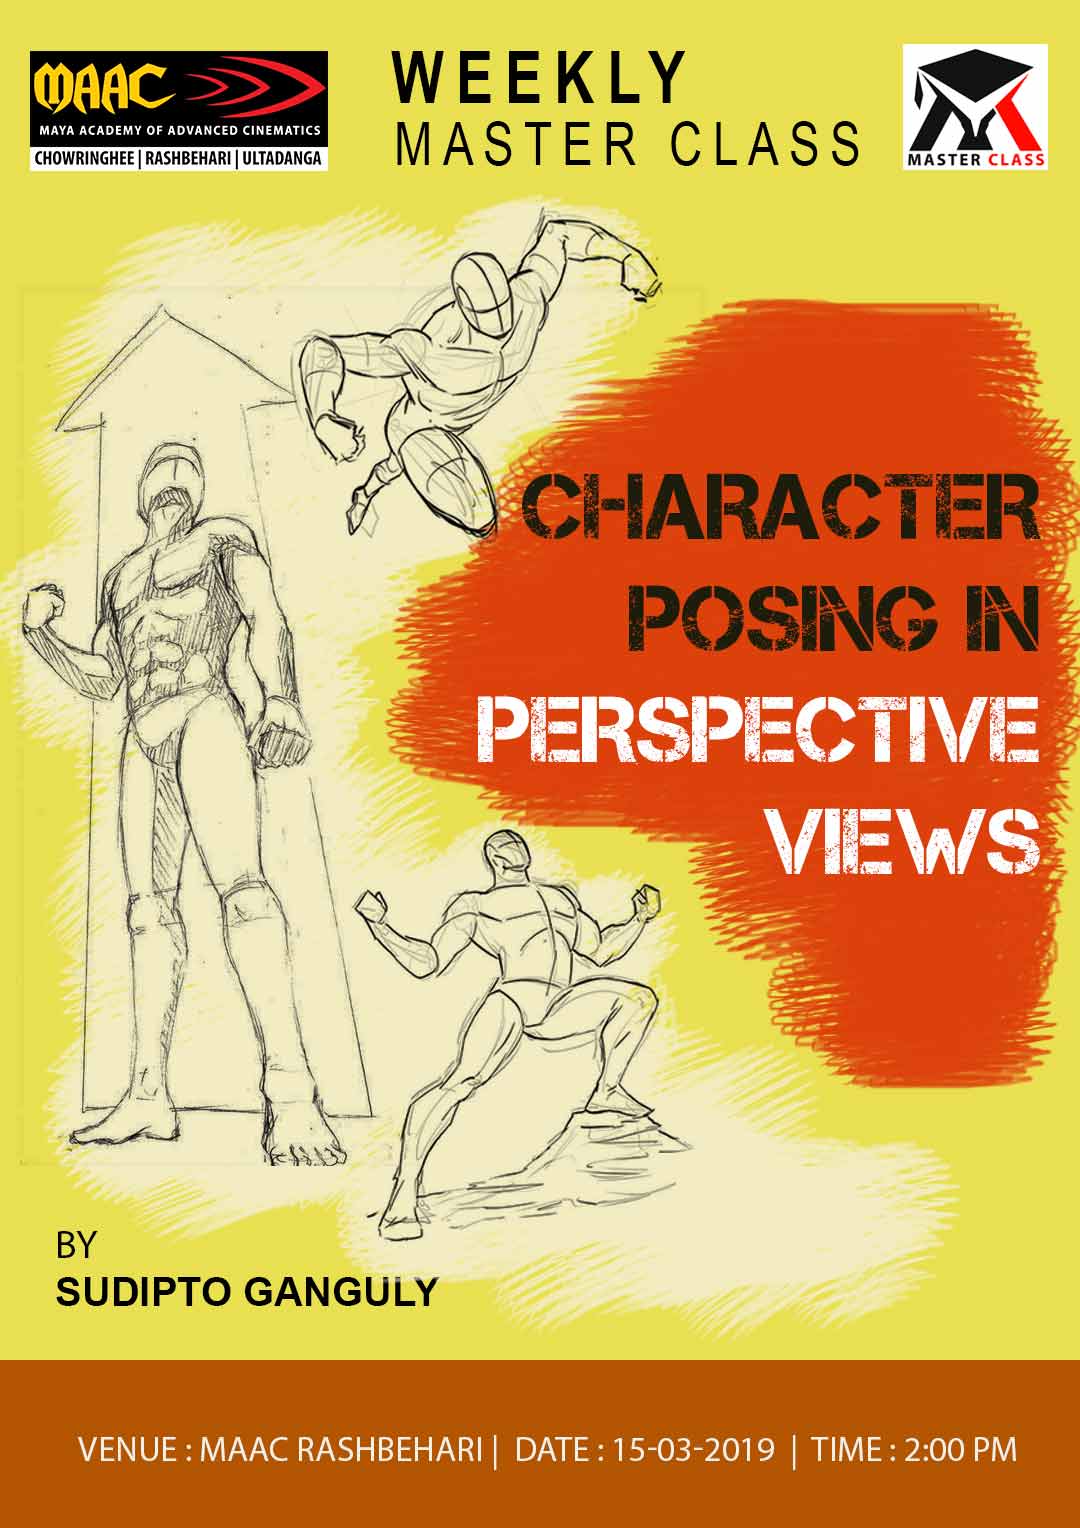 Weekly Master Class on Character Posing in Perspective